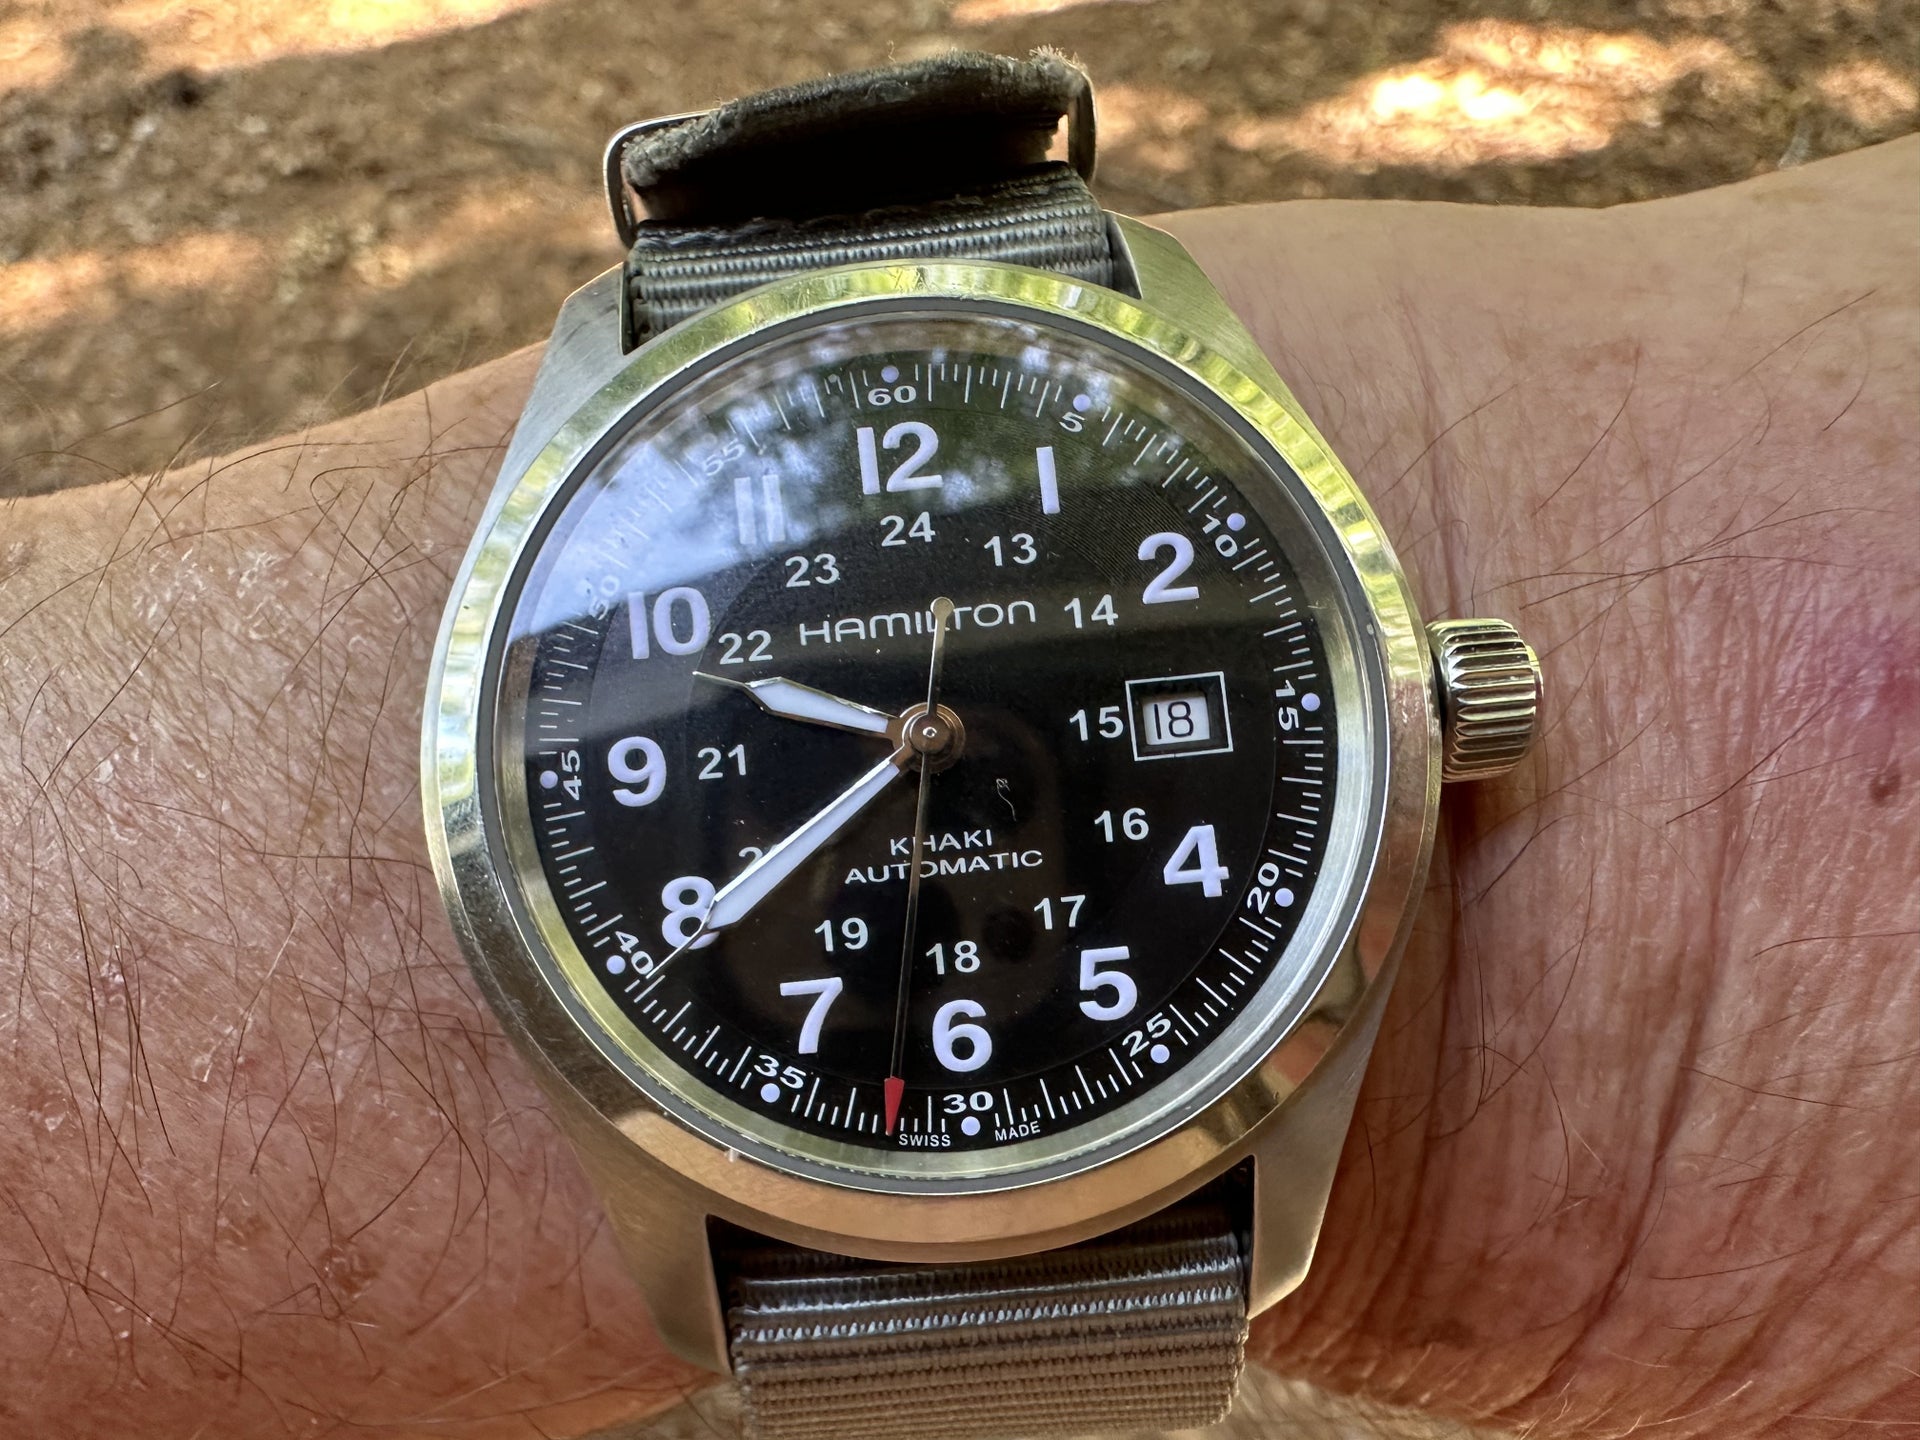 $600 for a “real” field watch - Marathon or Benrus or Other